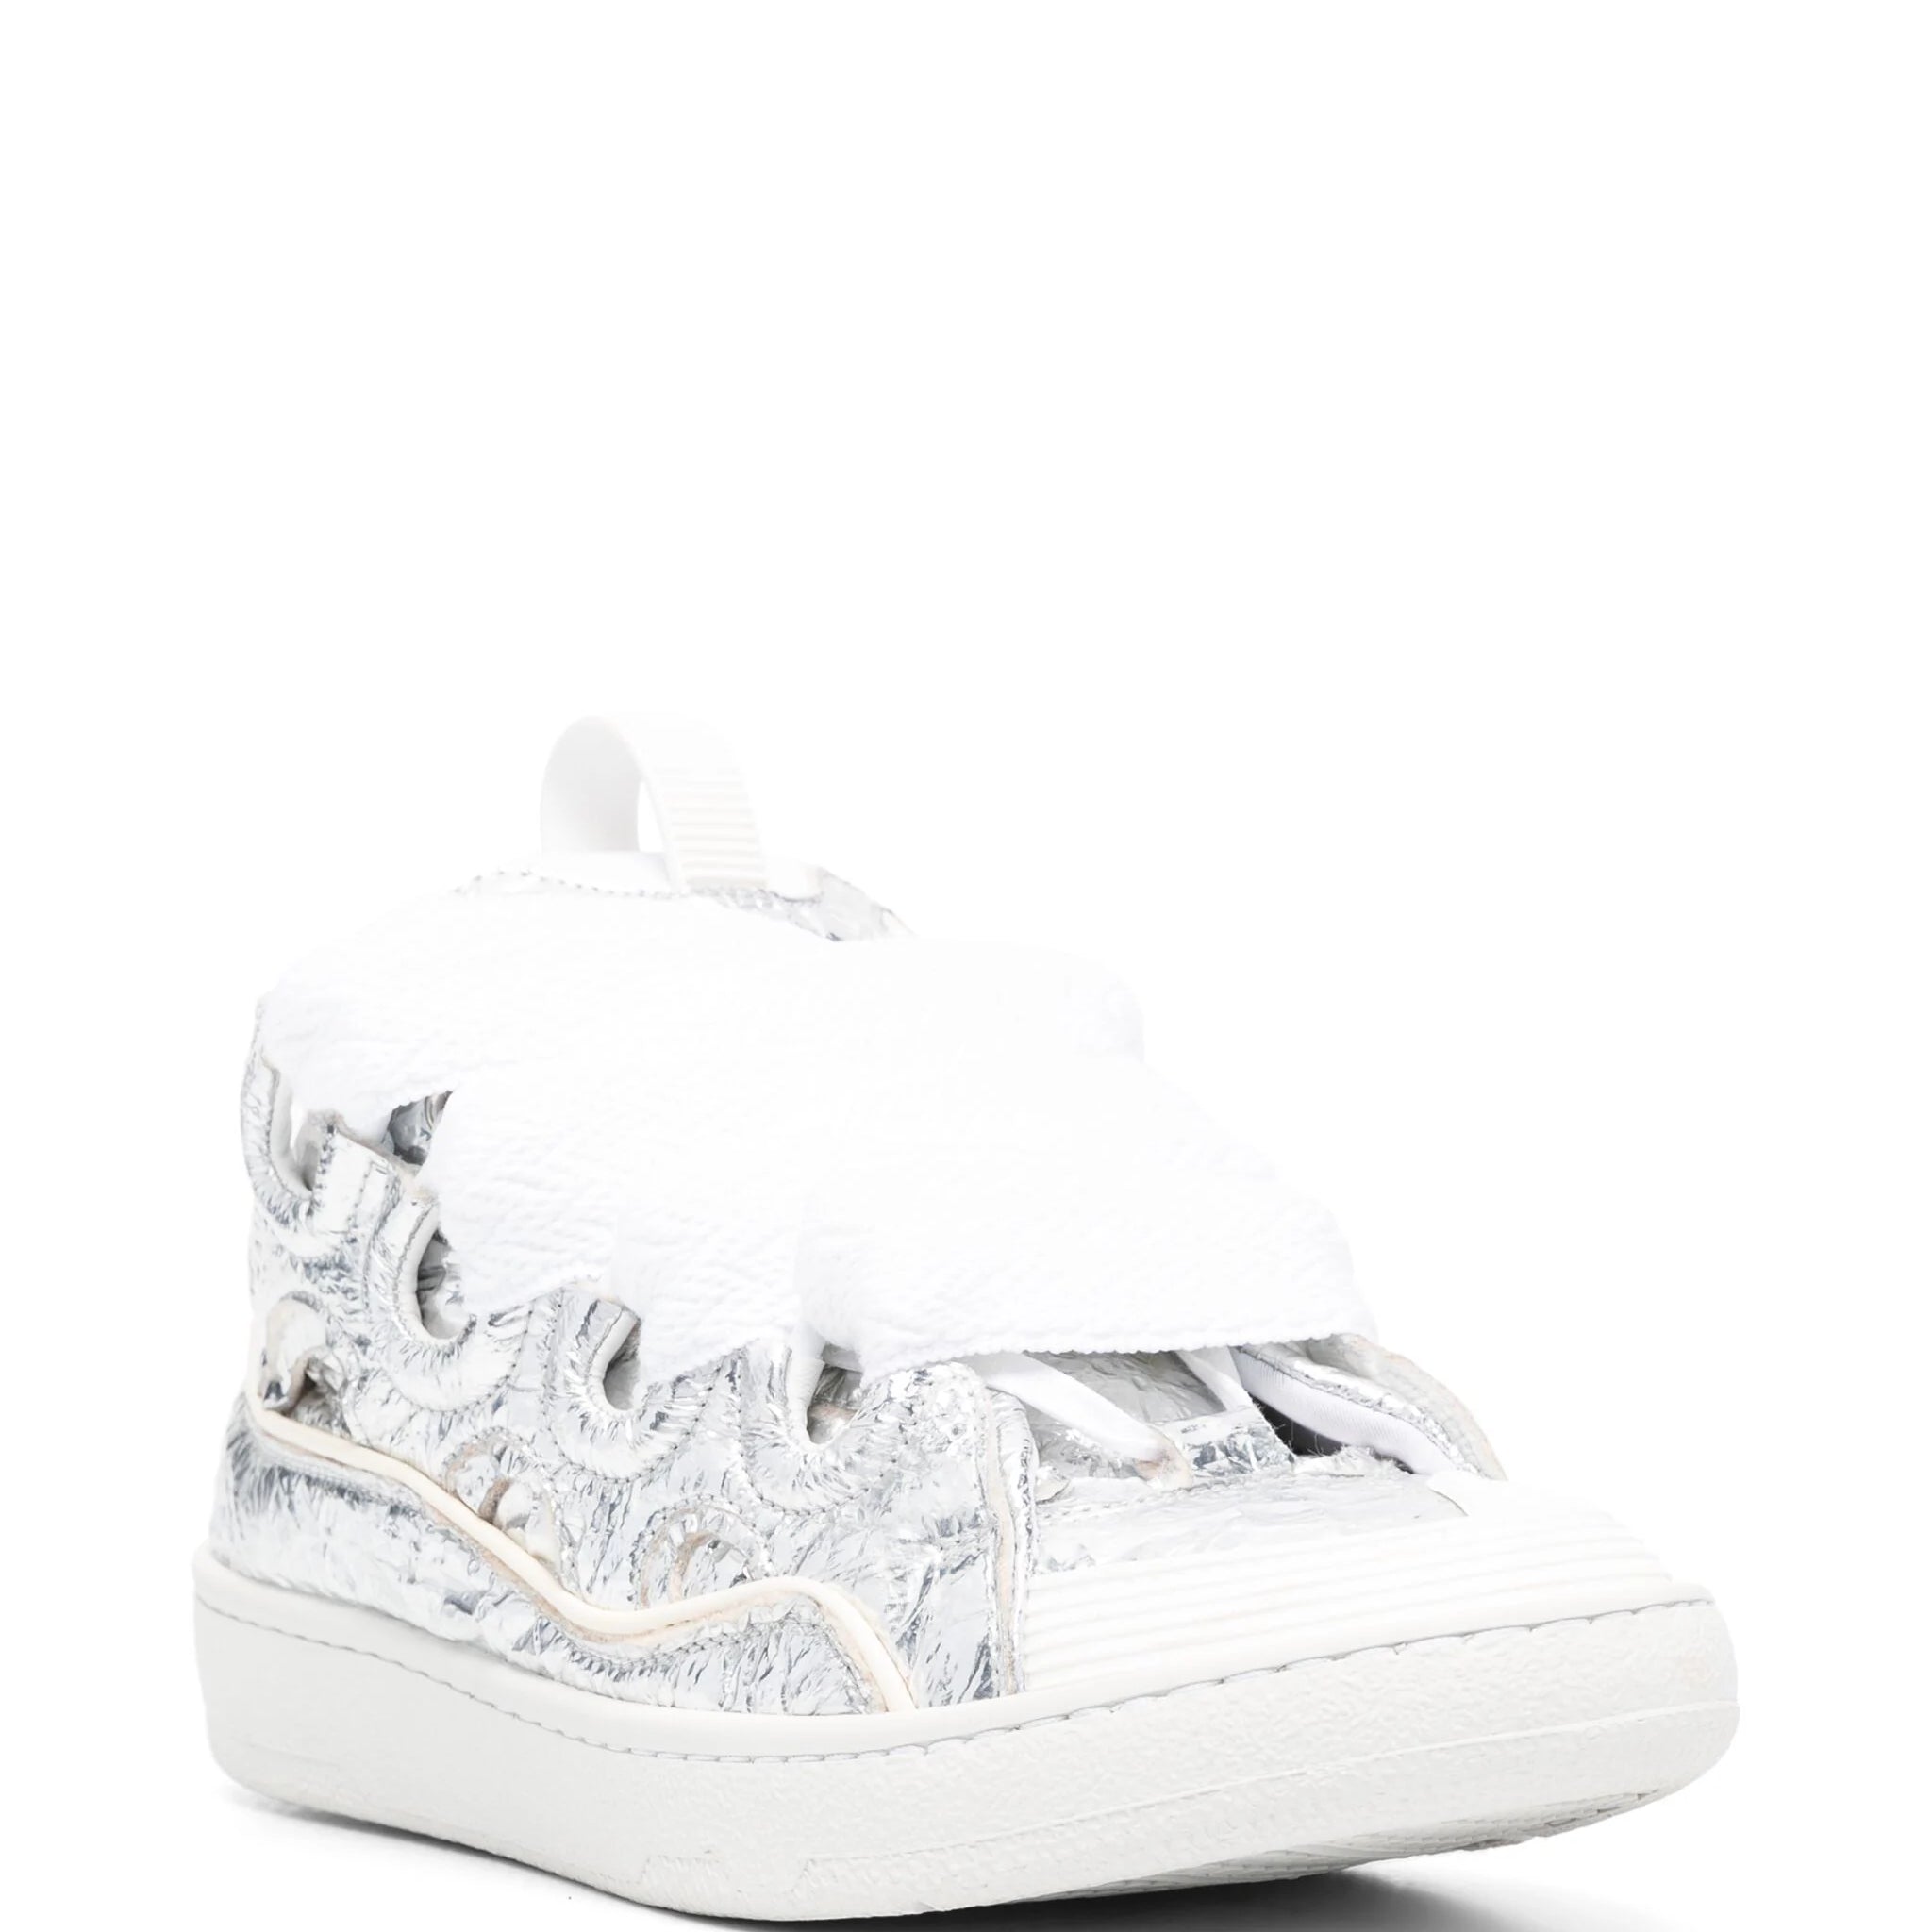 Lanvin Crinkle Effect Curb Leather Sneakers | Shop in Lisbon & Online at SHEET-1.com